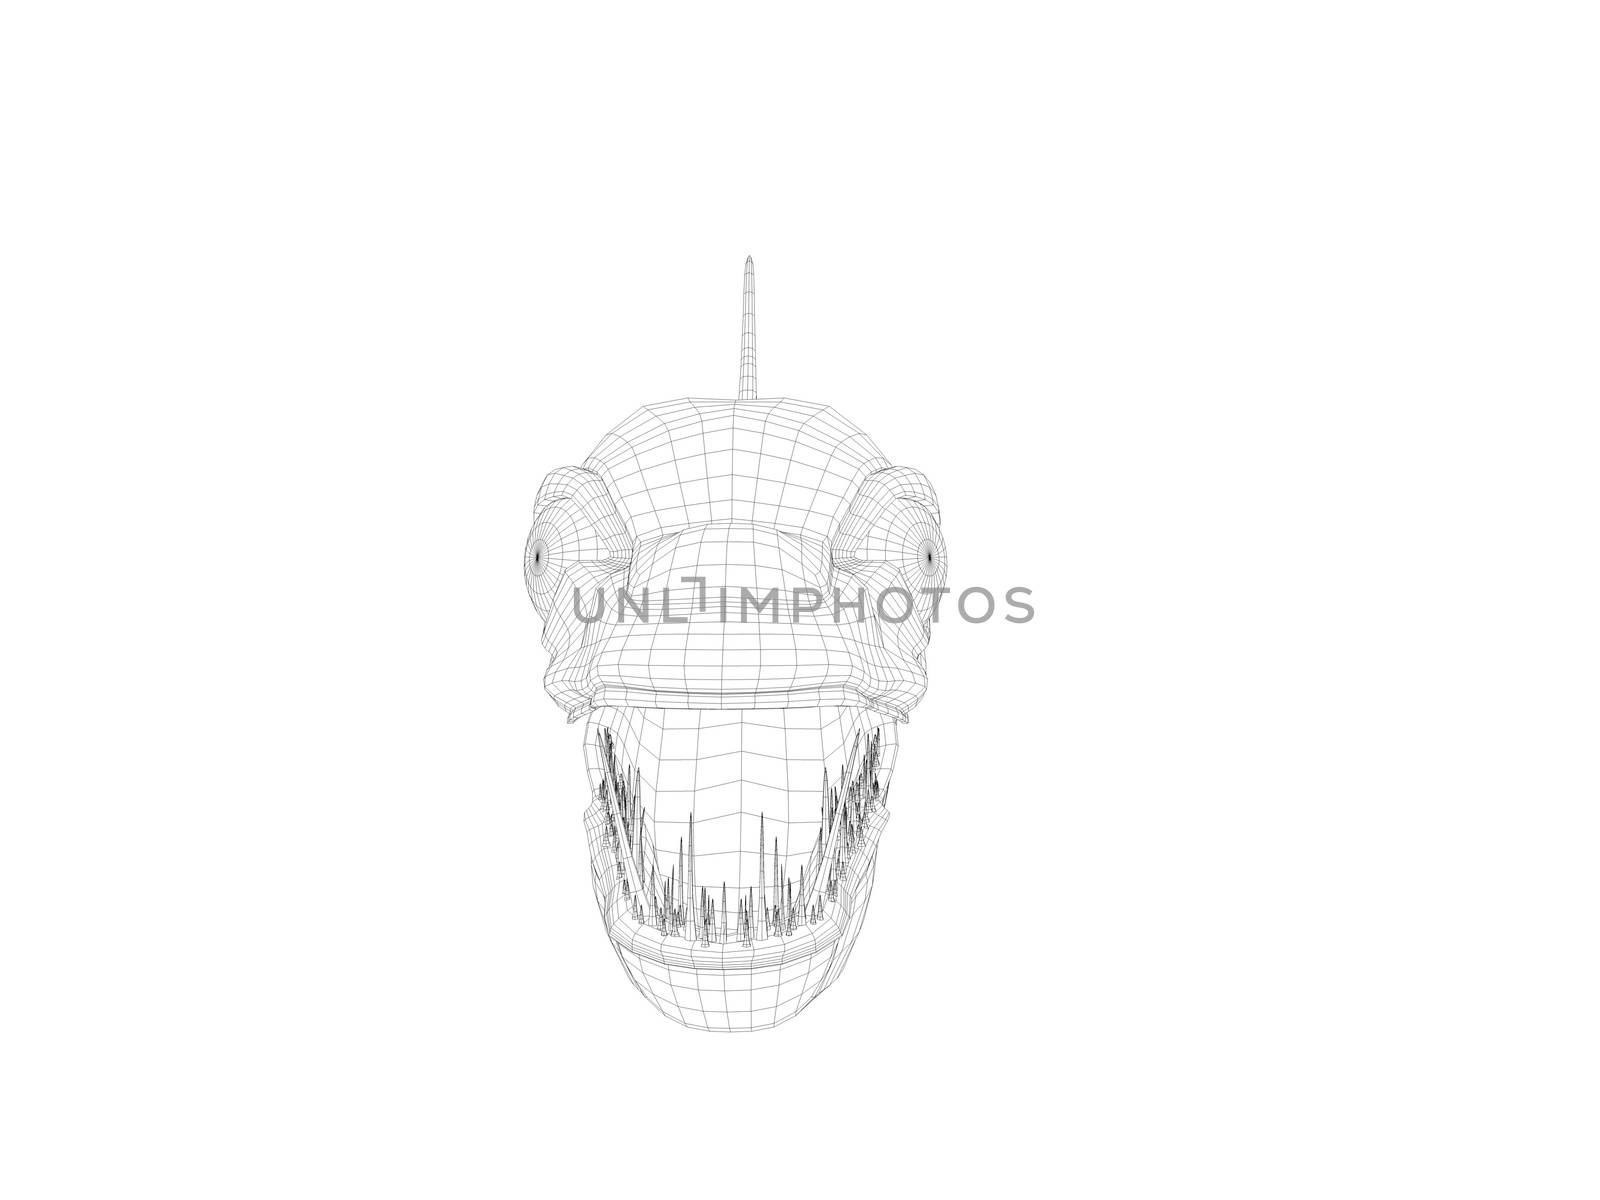 3d render depicting a dinosaur, which lived during the Cretaceous period, isolated on white.